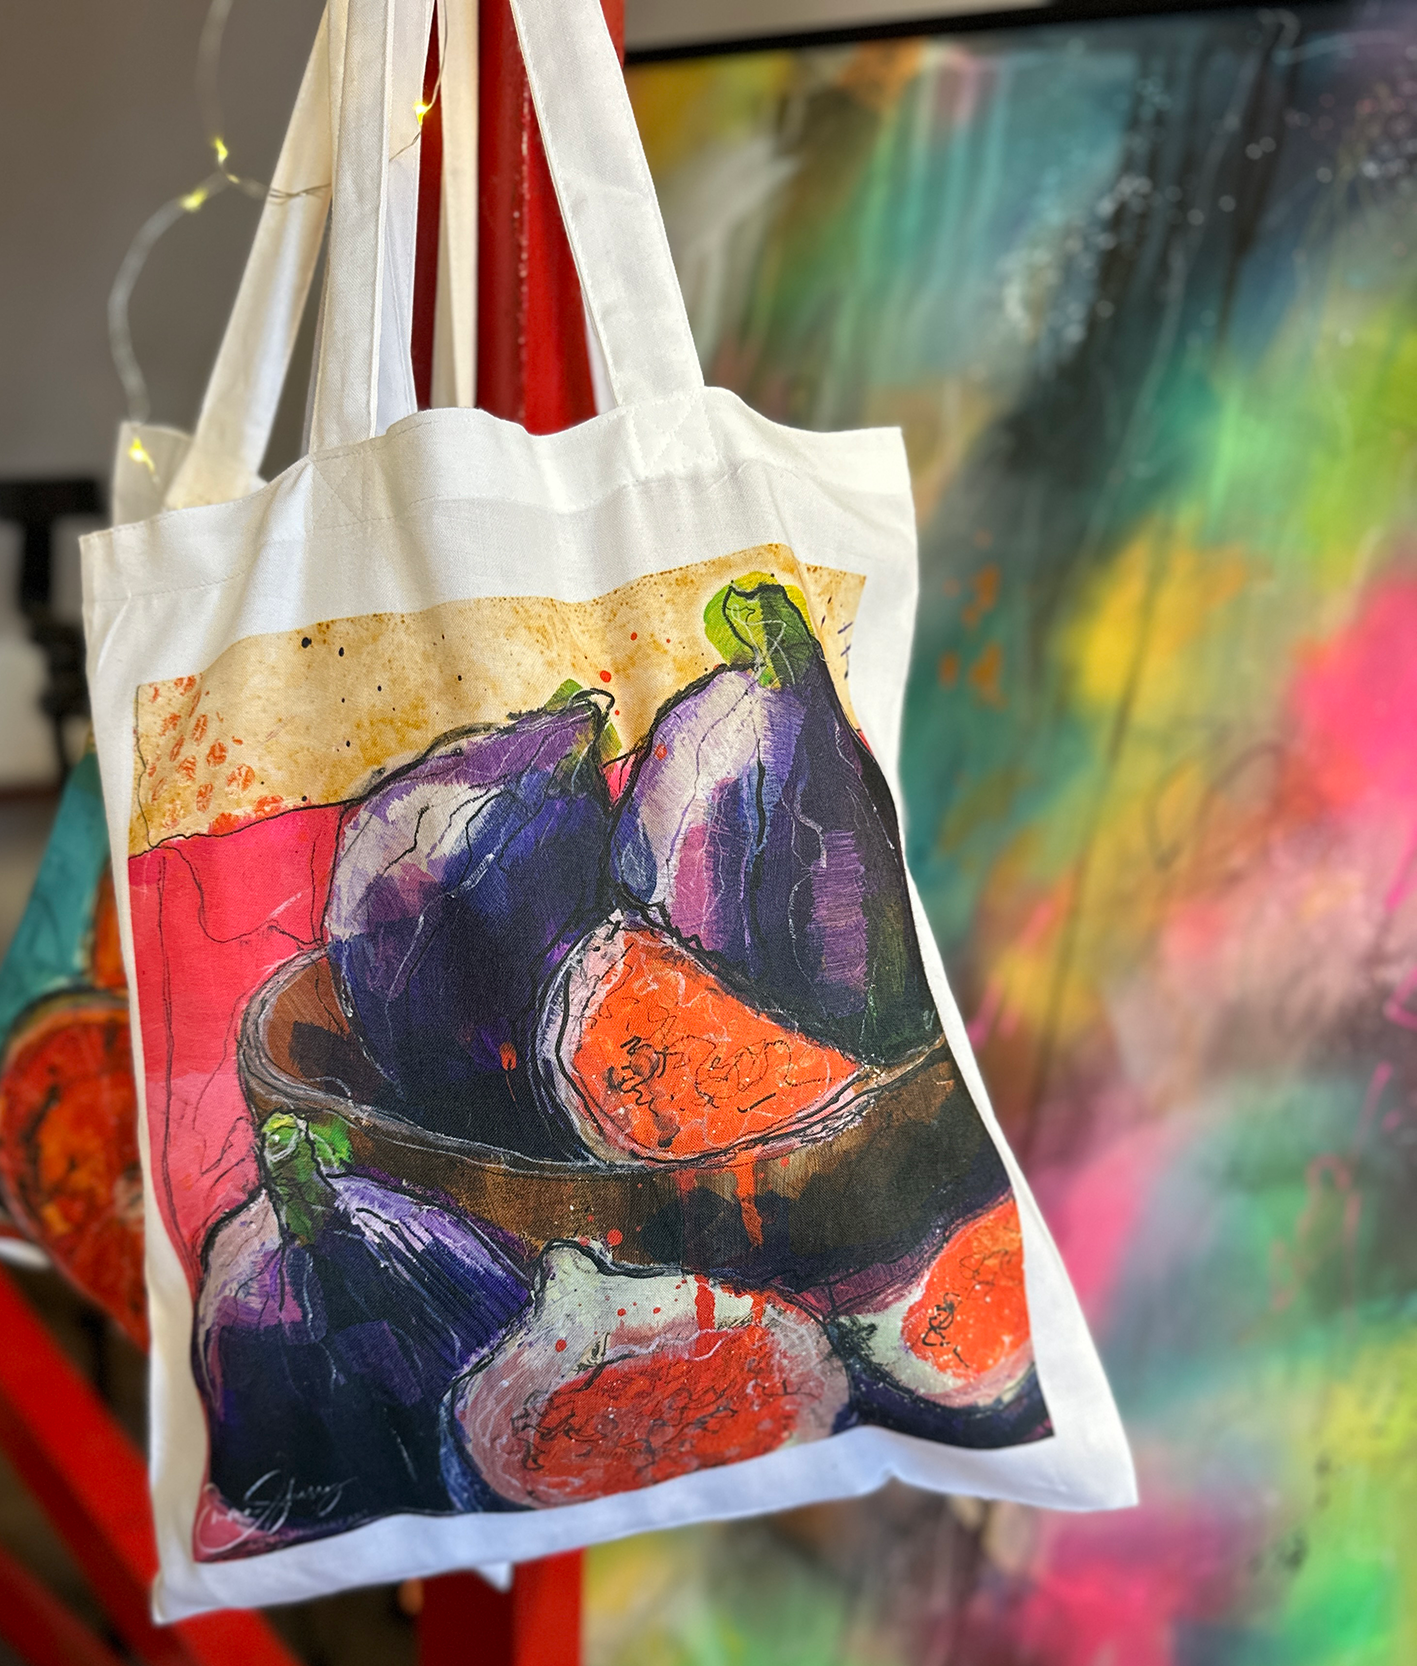 Lightweight Tote Bag - Figs